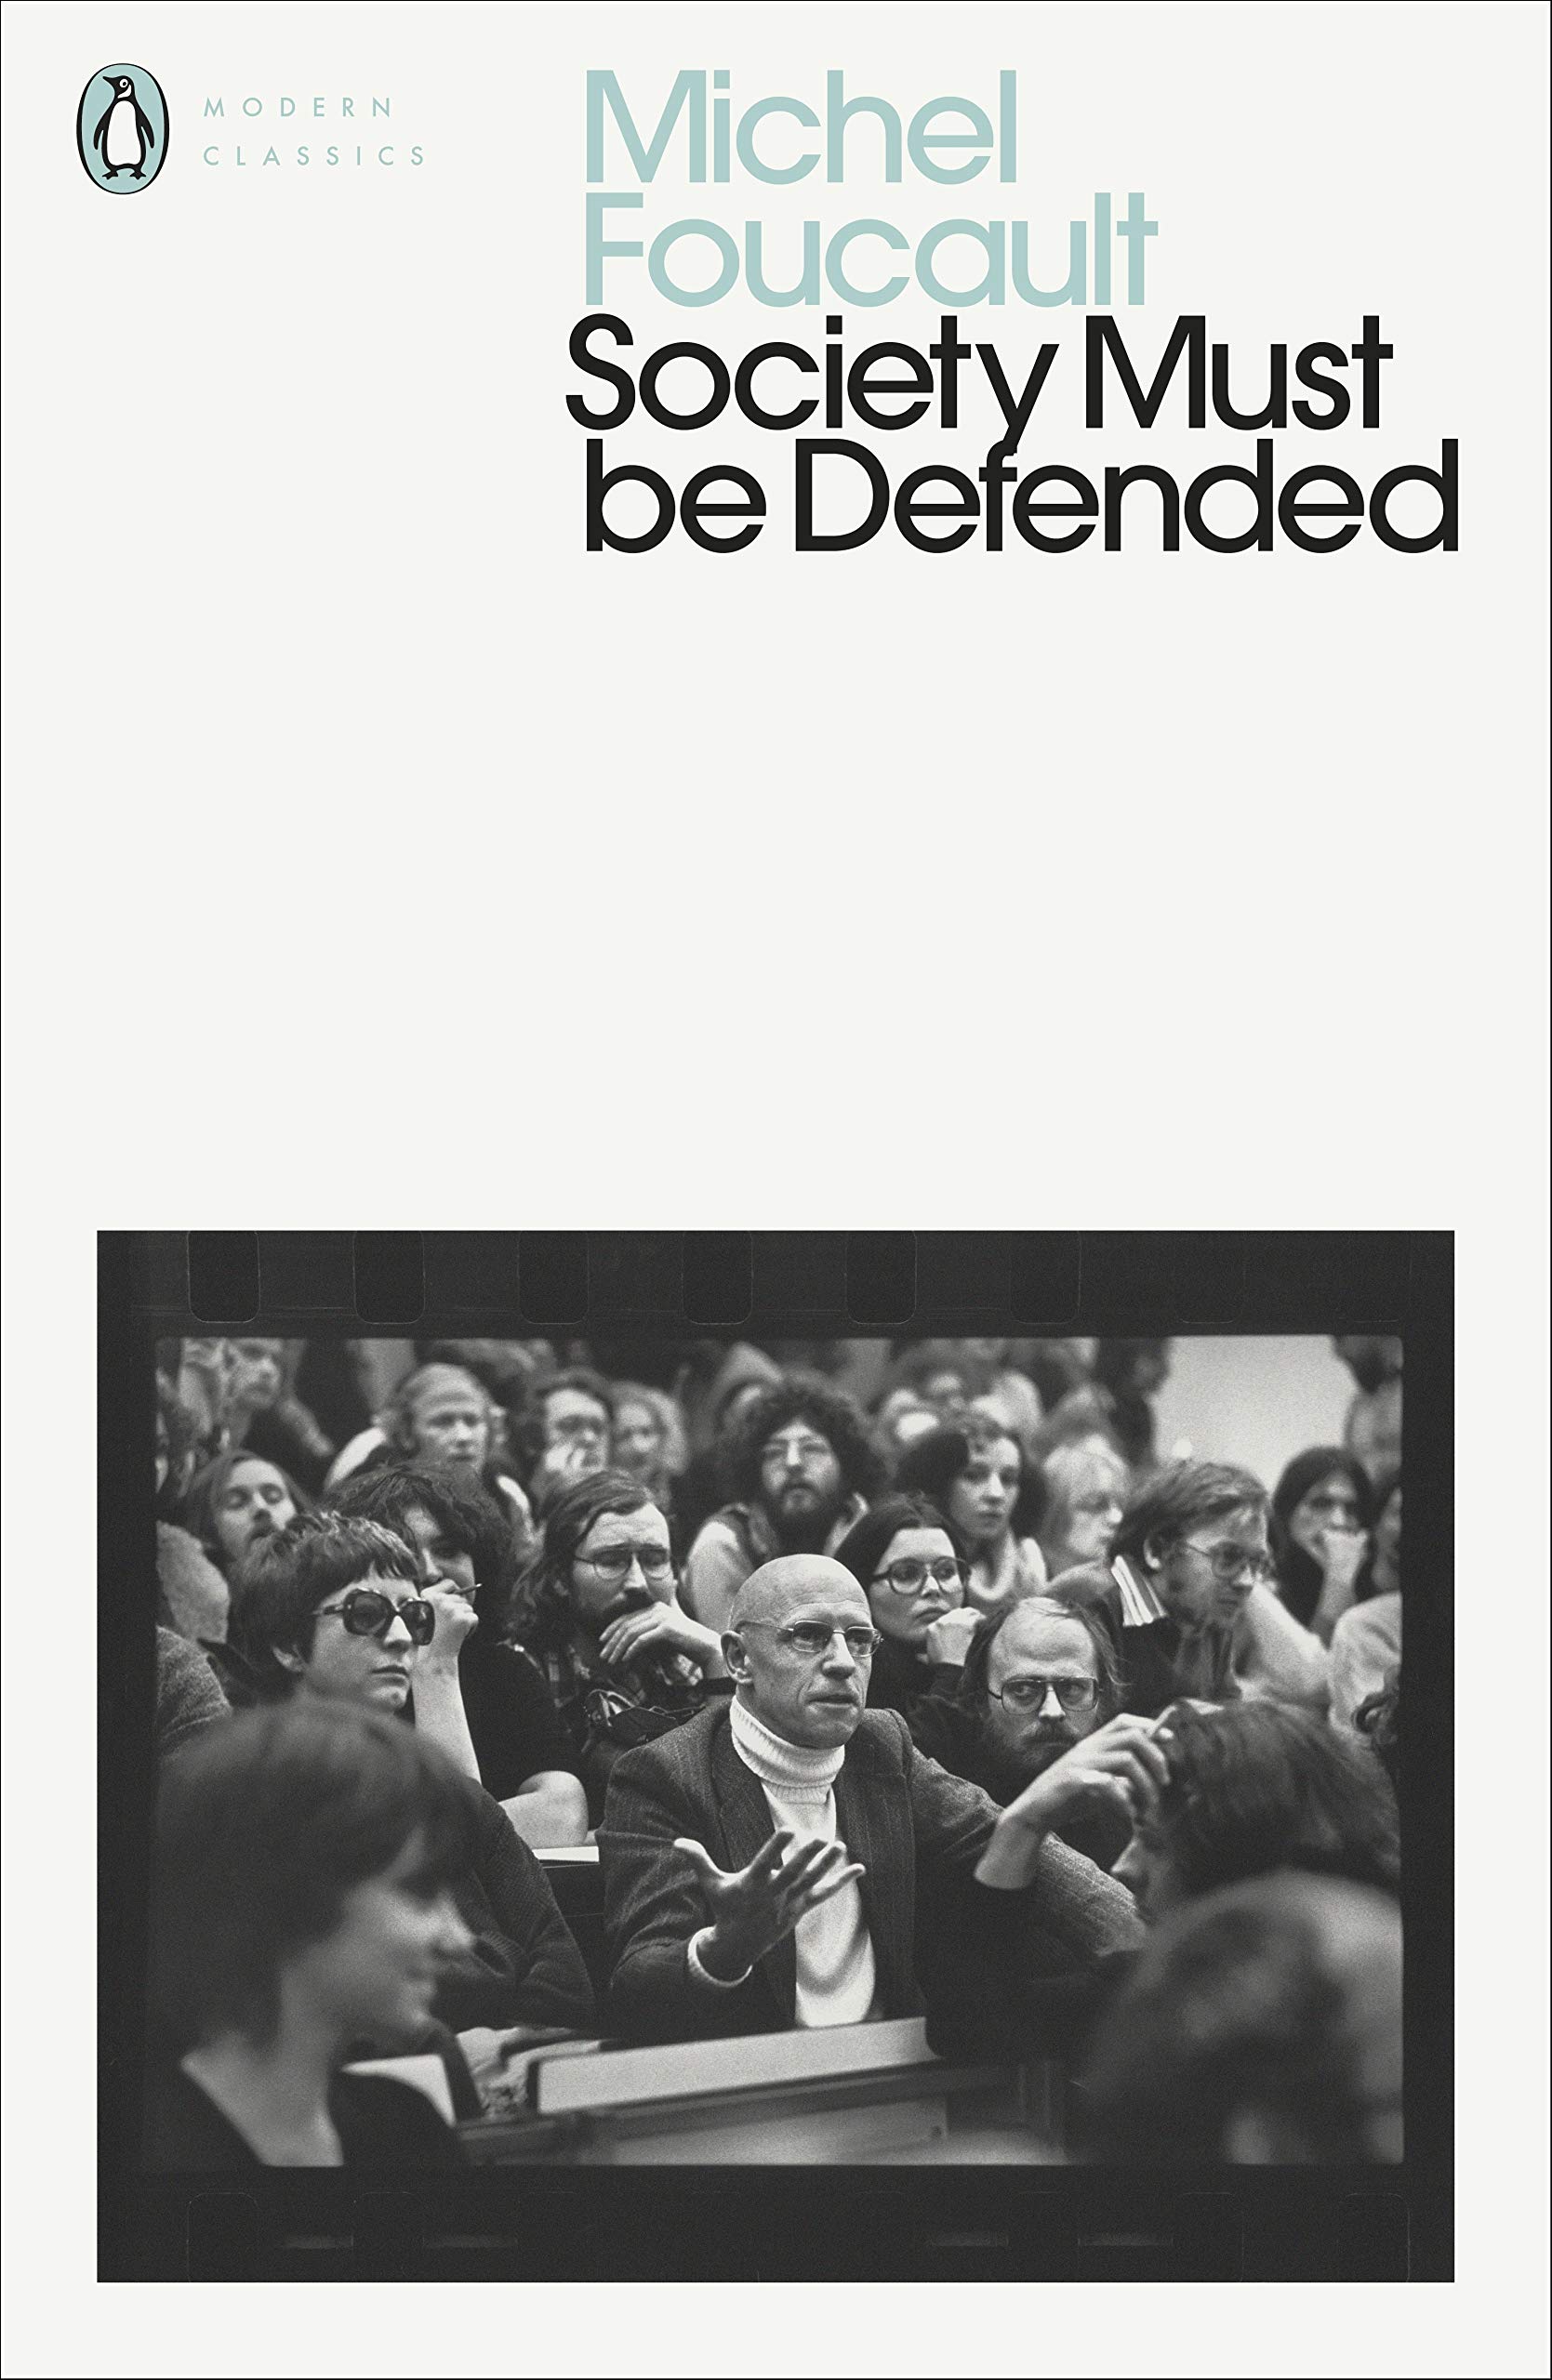 Society Must be Defended | Michel Foucault image16